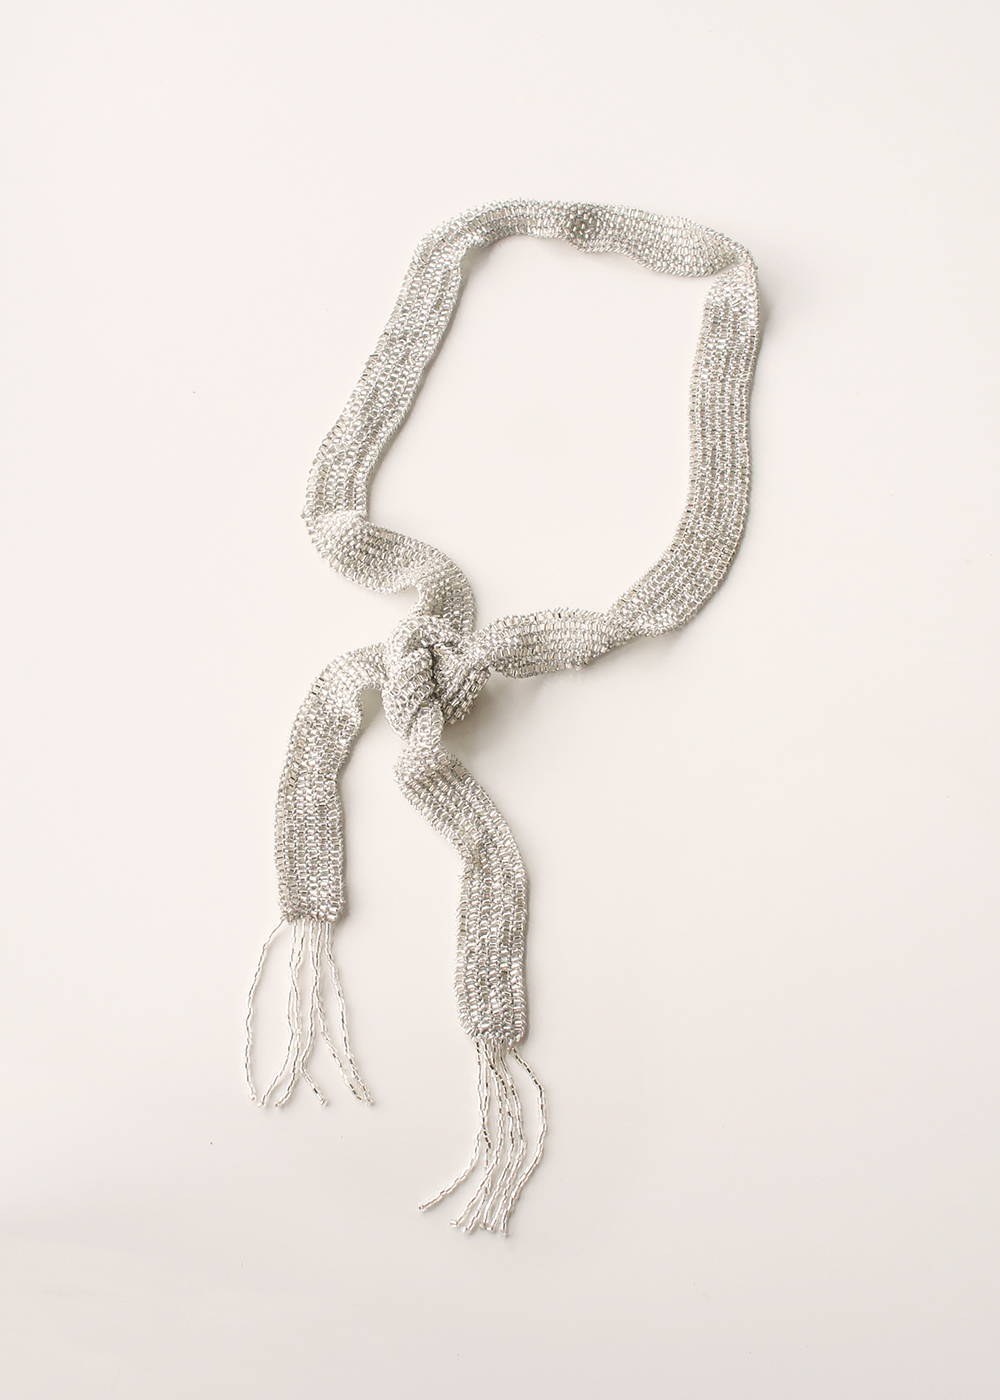 A silver beaded necktie with tasselled ends